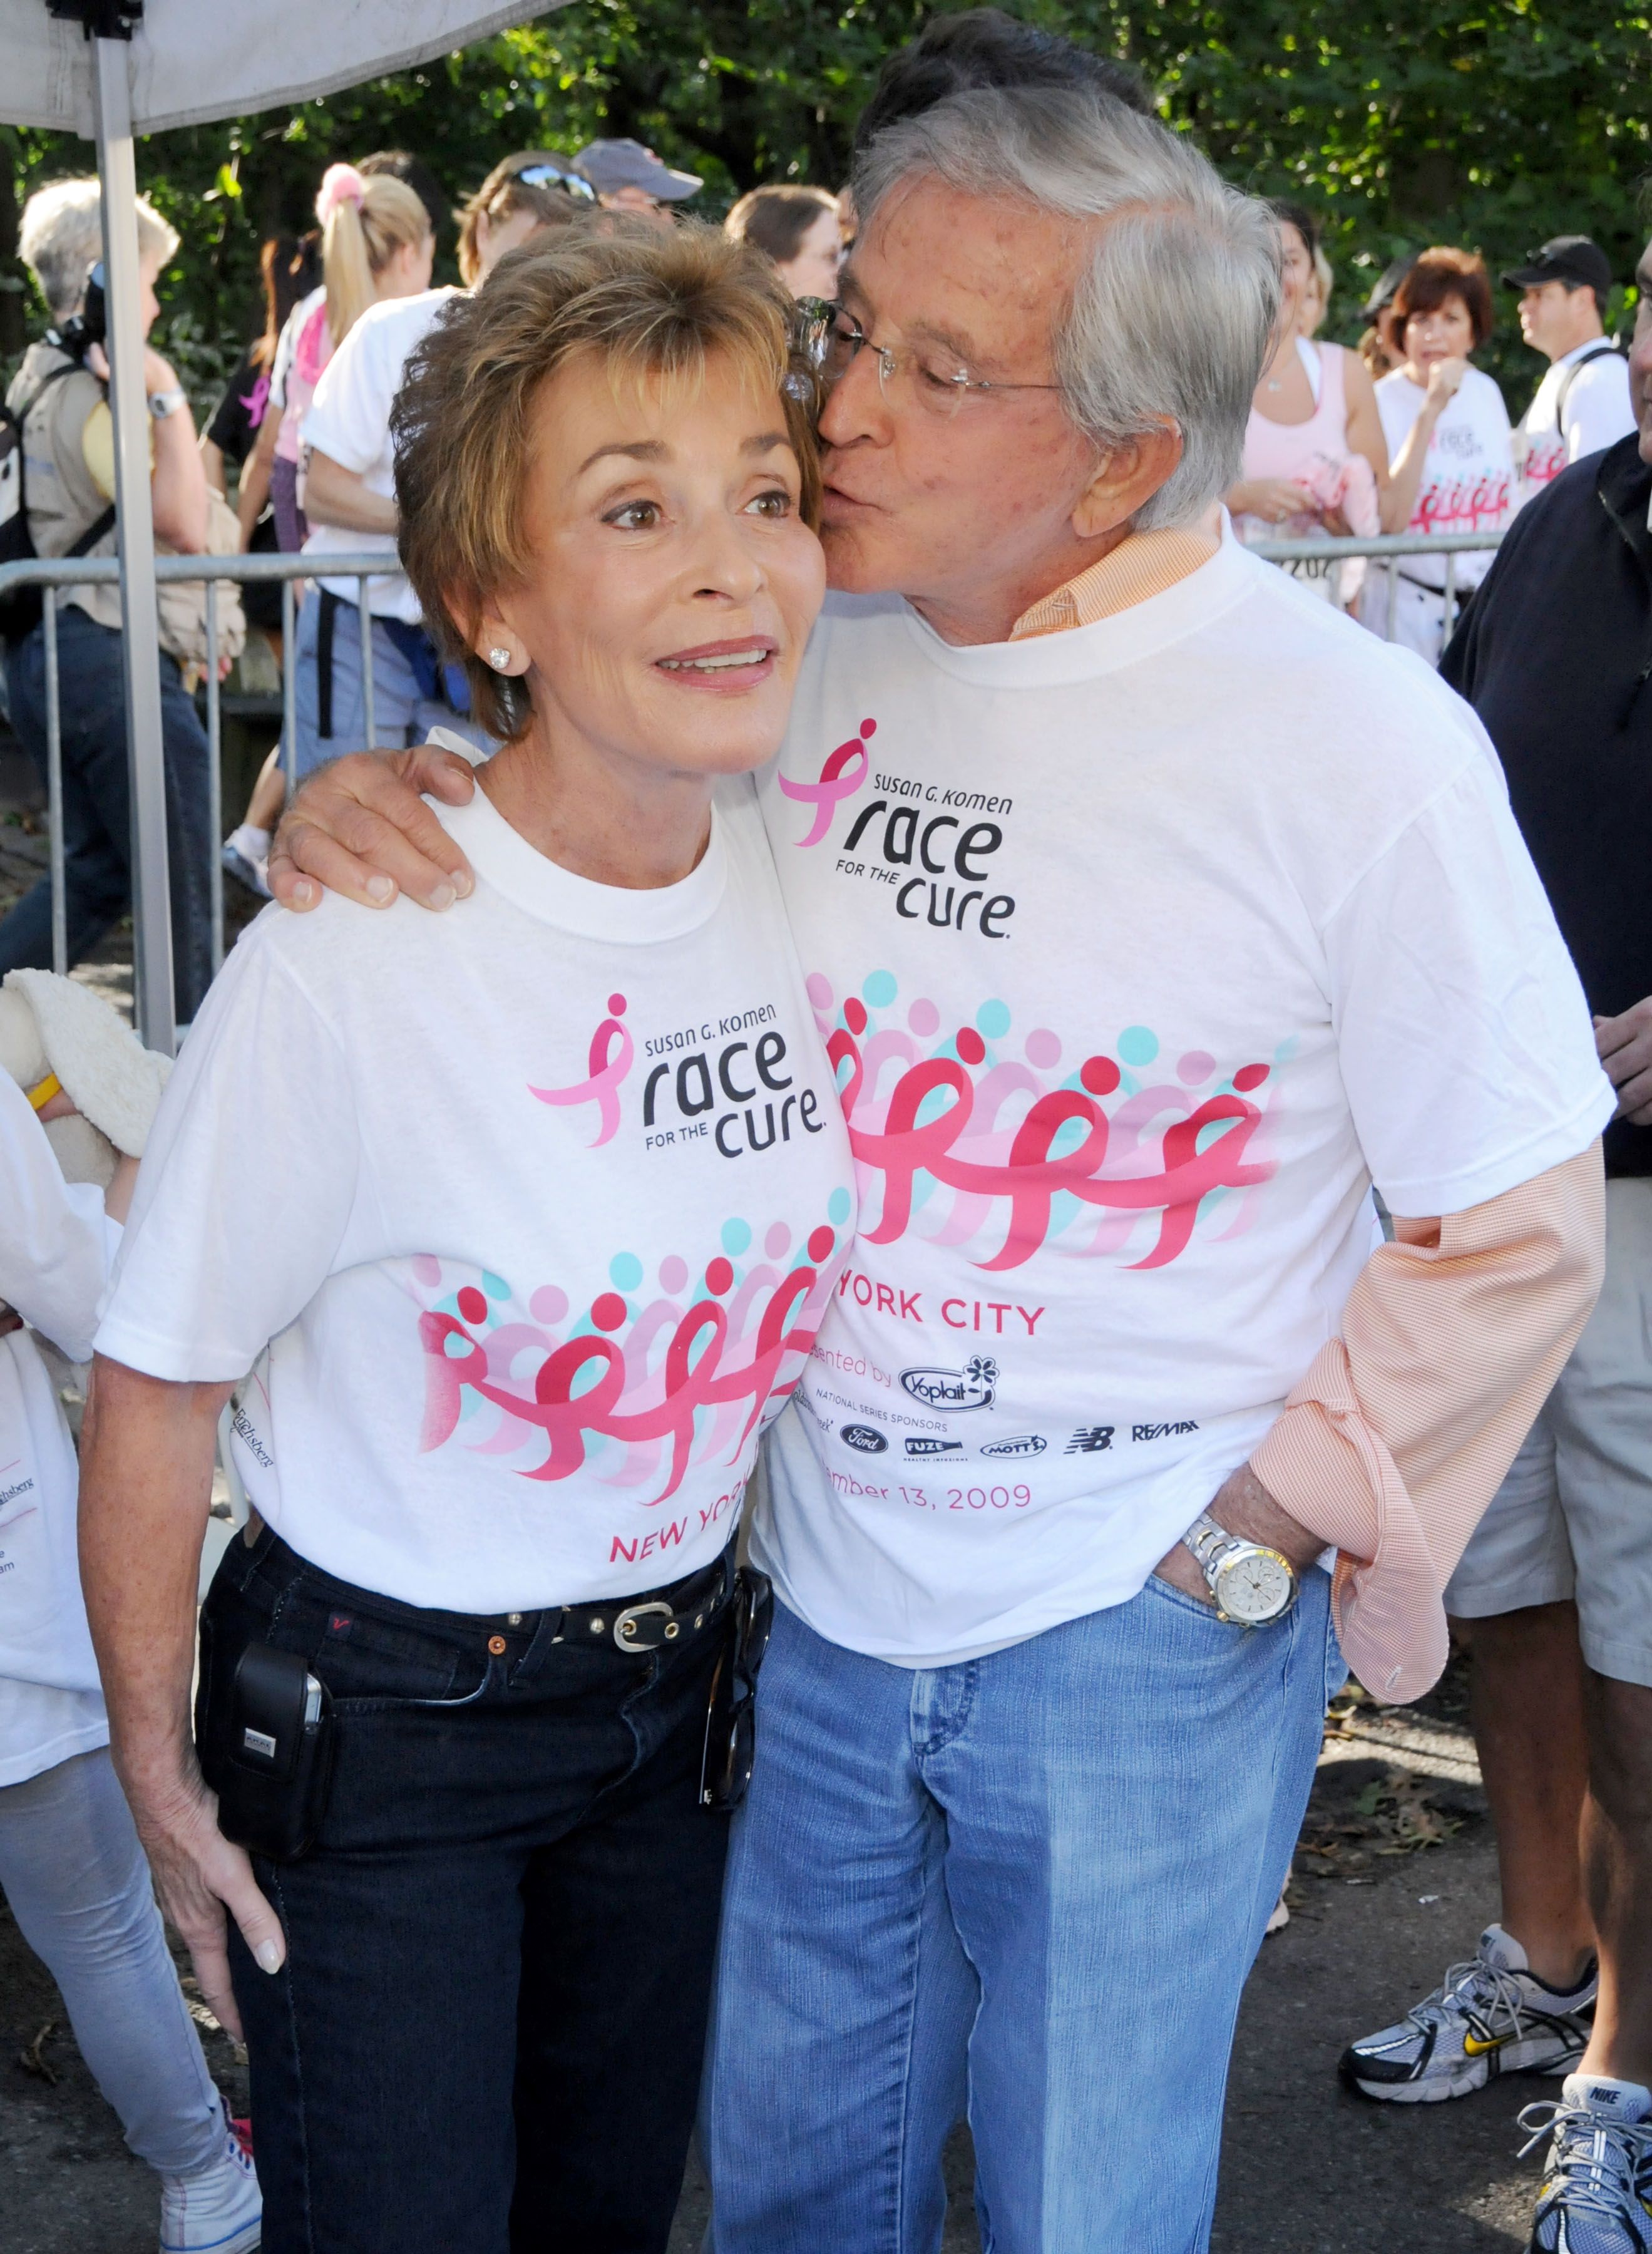 Judy and Jerry Sheindlin at the Susan G. Komen New York City Race For The Cure in New York on September 13, 2009 | Photo: Gregg DeGuire/FilmMagic/Getty Images